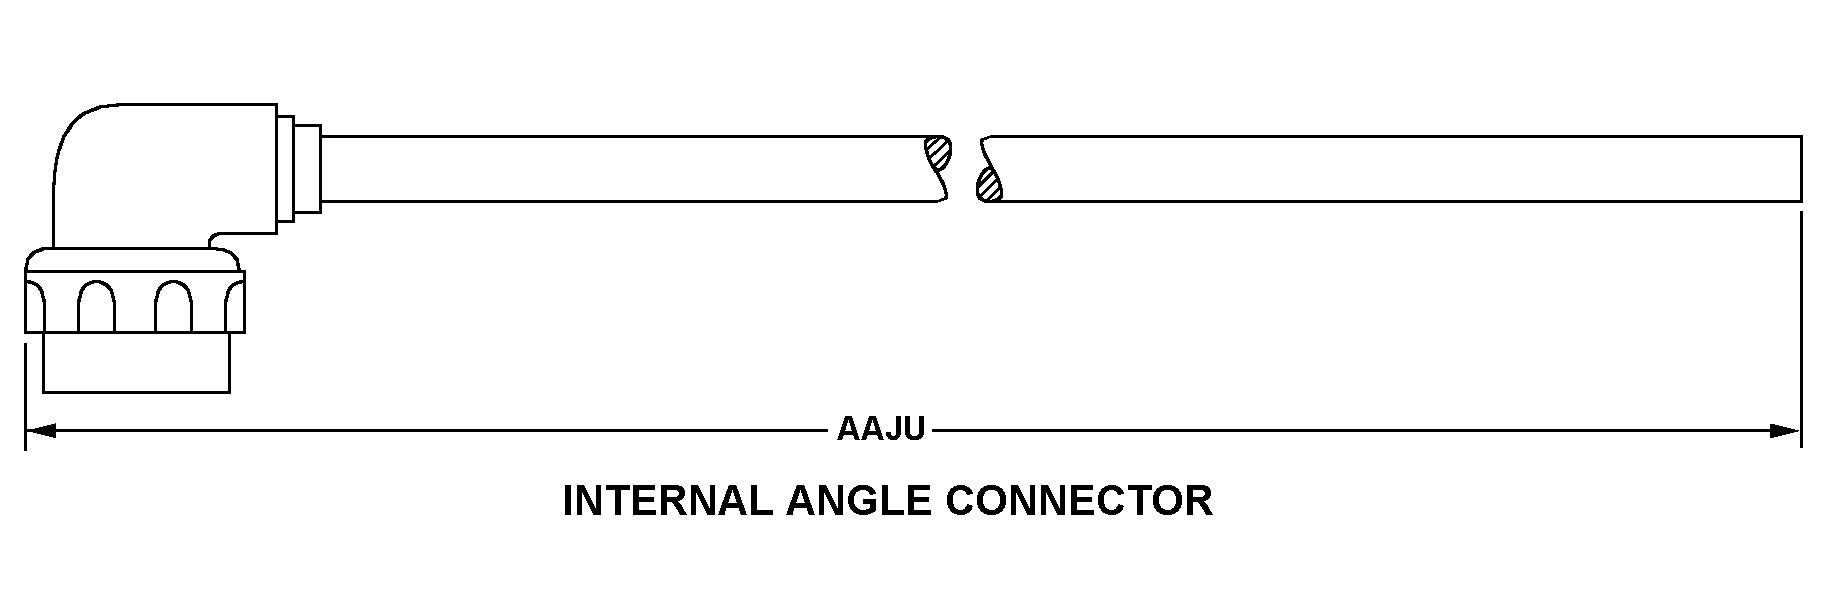 INTERNAL ANGLE CONNECTOR style nsn 5995-00-322-7783